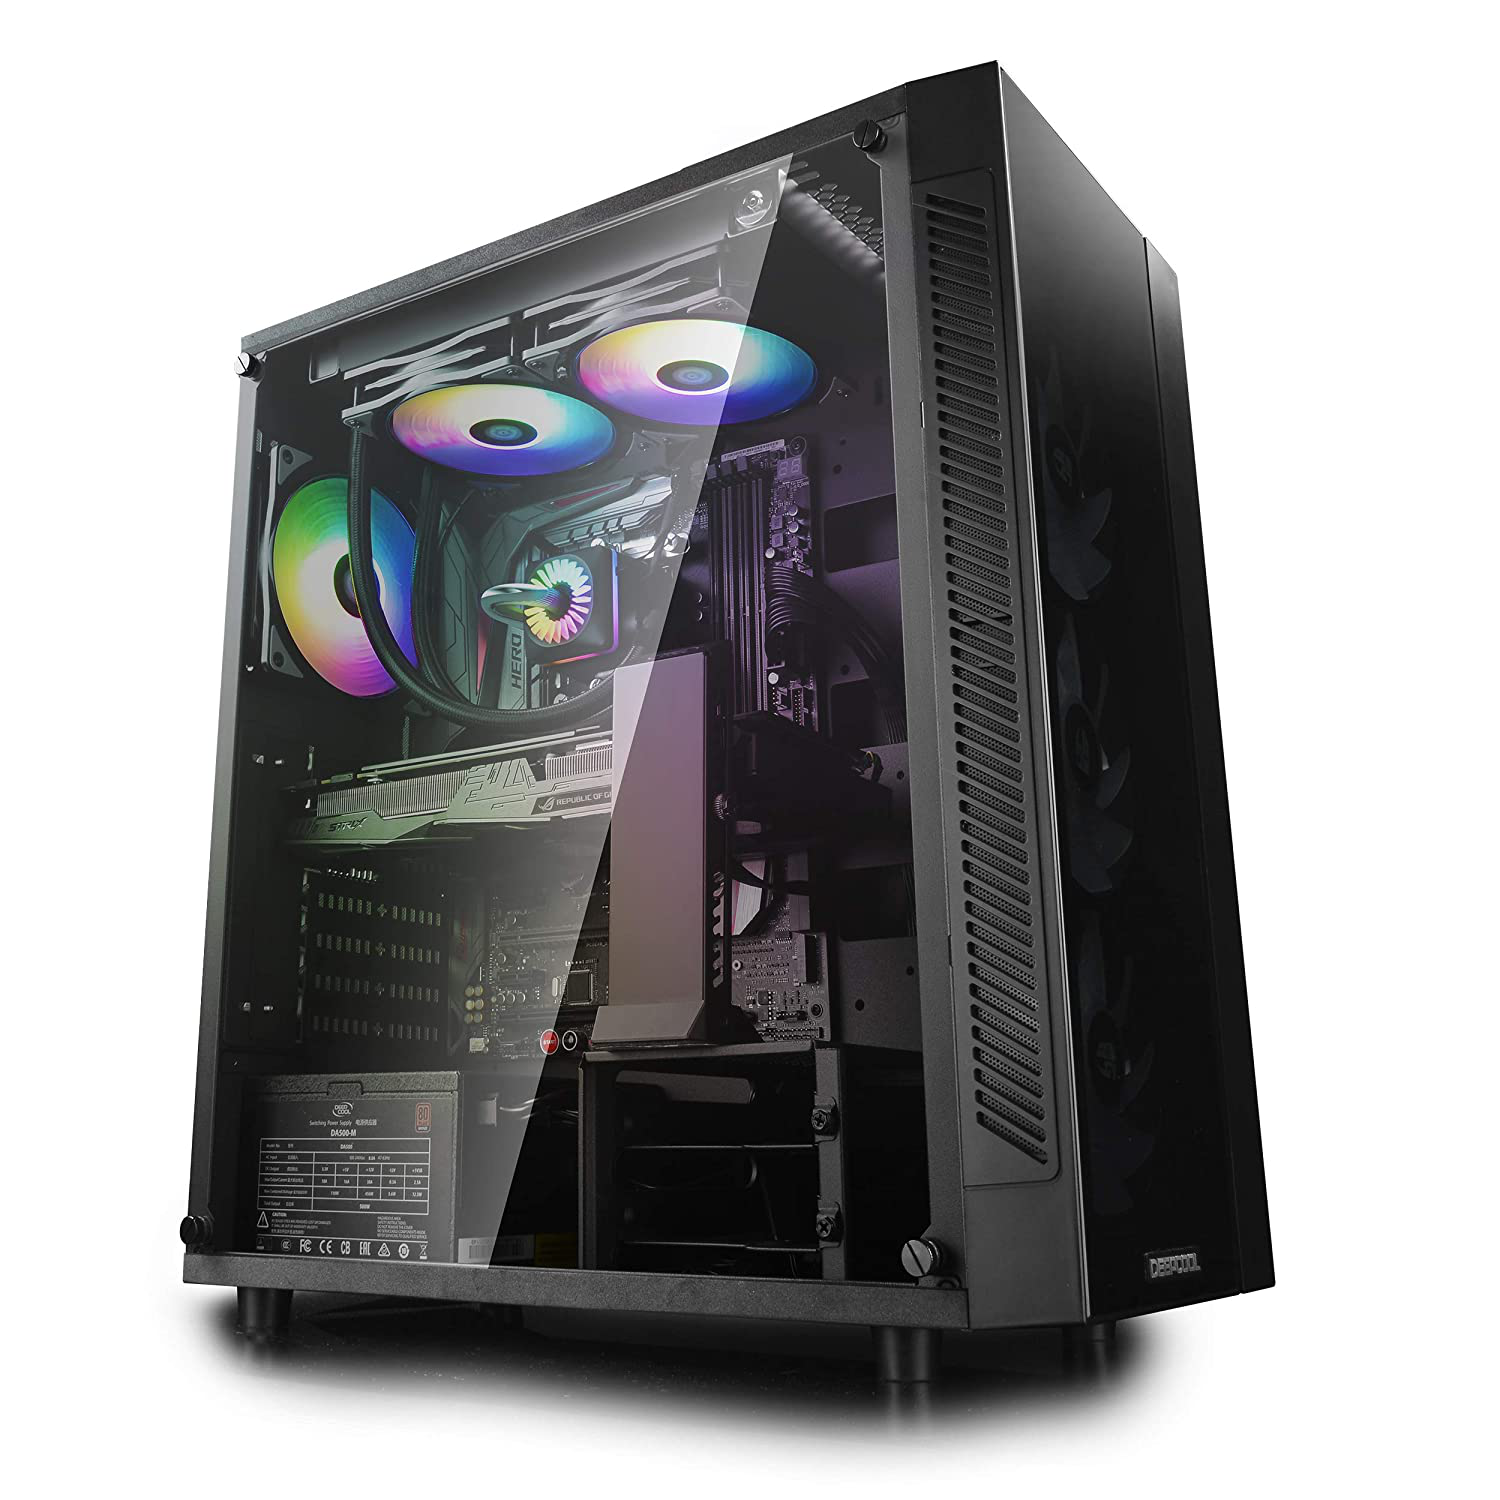 DEEPCOOL Captain 240PRO V2, ADD-RGB AIO CPU Liquid Cooler, Anti-Leak Tech Inside, Stainless Steel U-Shape Pipe, Cable Controller and Motherboard with 5V 3-Pin A-RGB Header Control, 3-Year Warranty